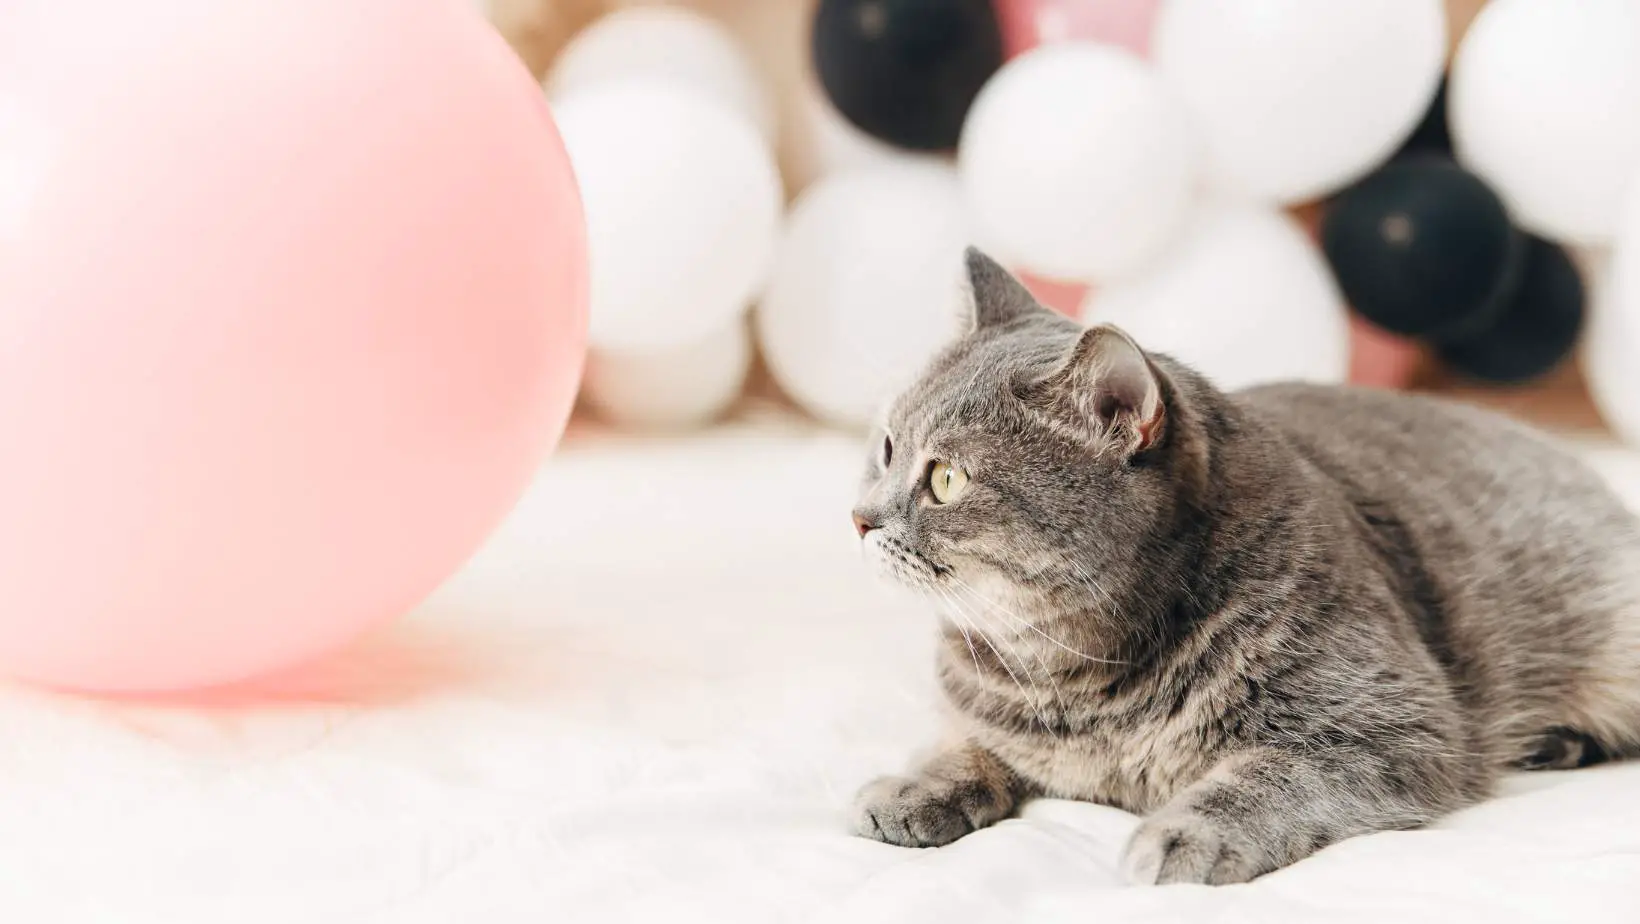 Why Are Cats Afraid of Balloons?